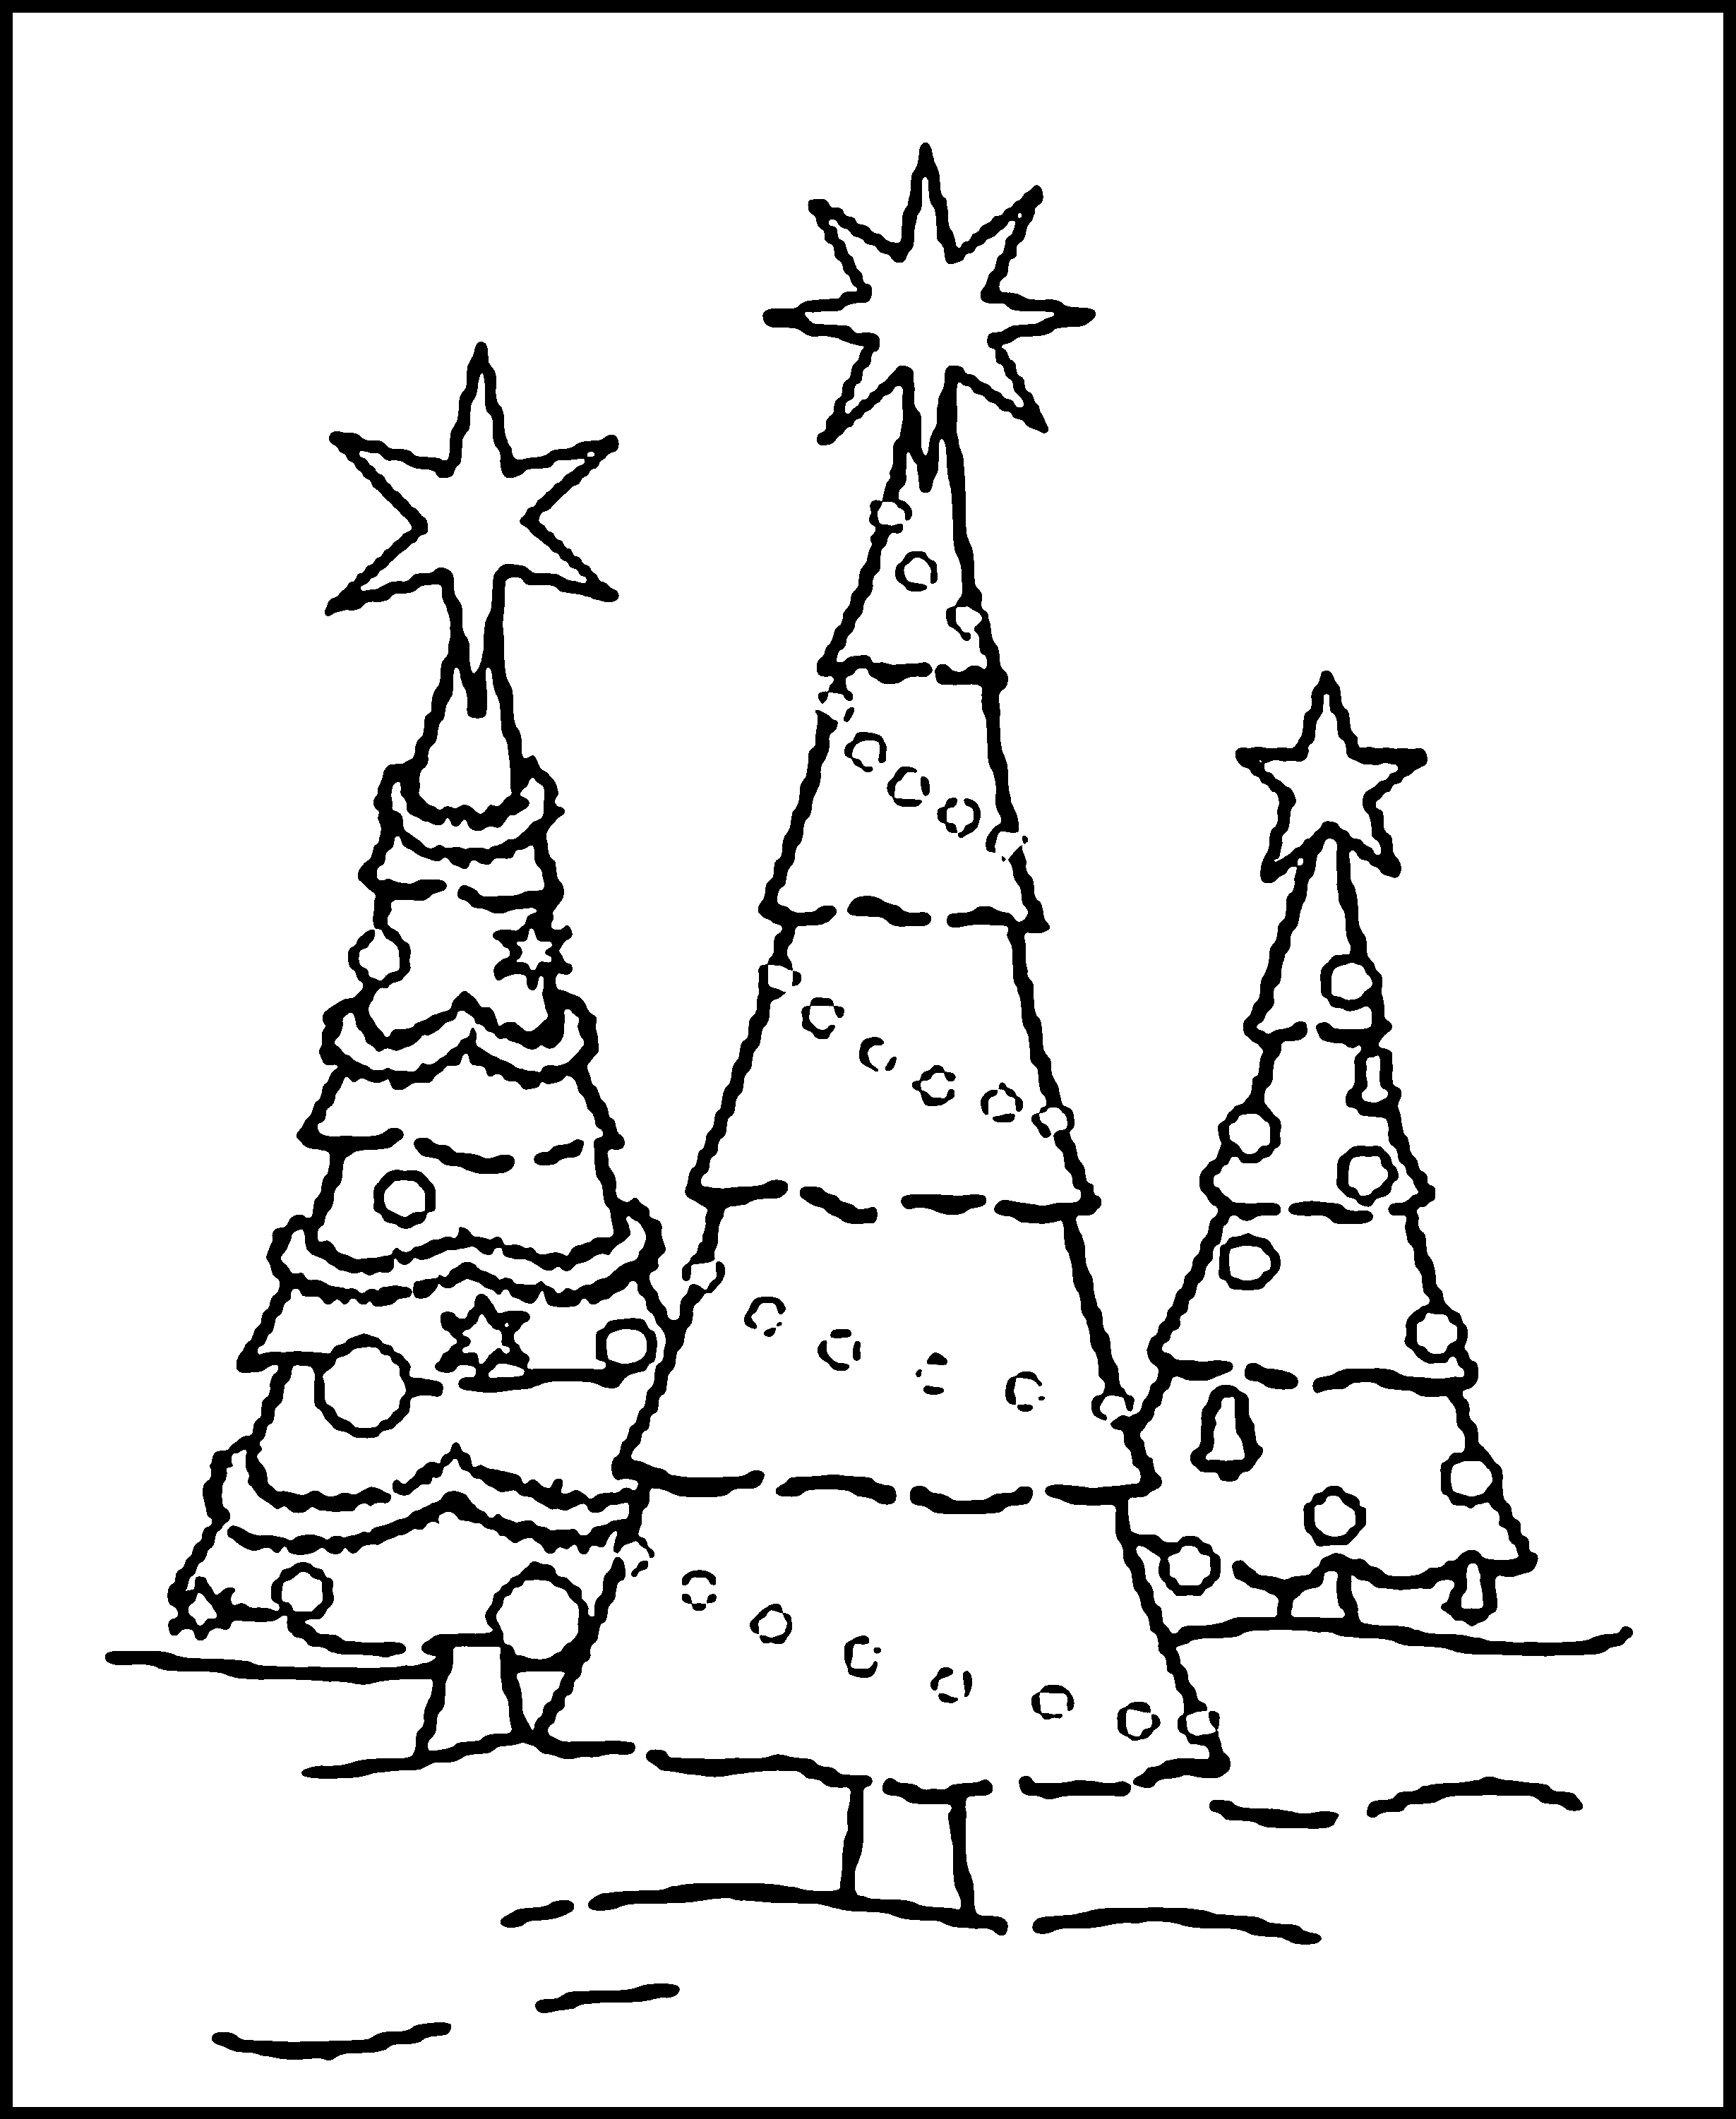 coloring-pages-of-pine-trees-at-getcolorings-free-printable-colorings-pages-to-print-and-color